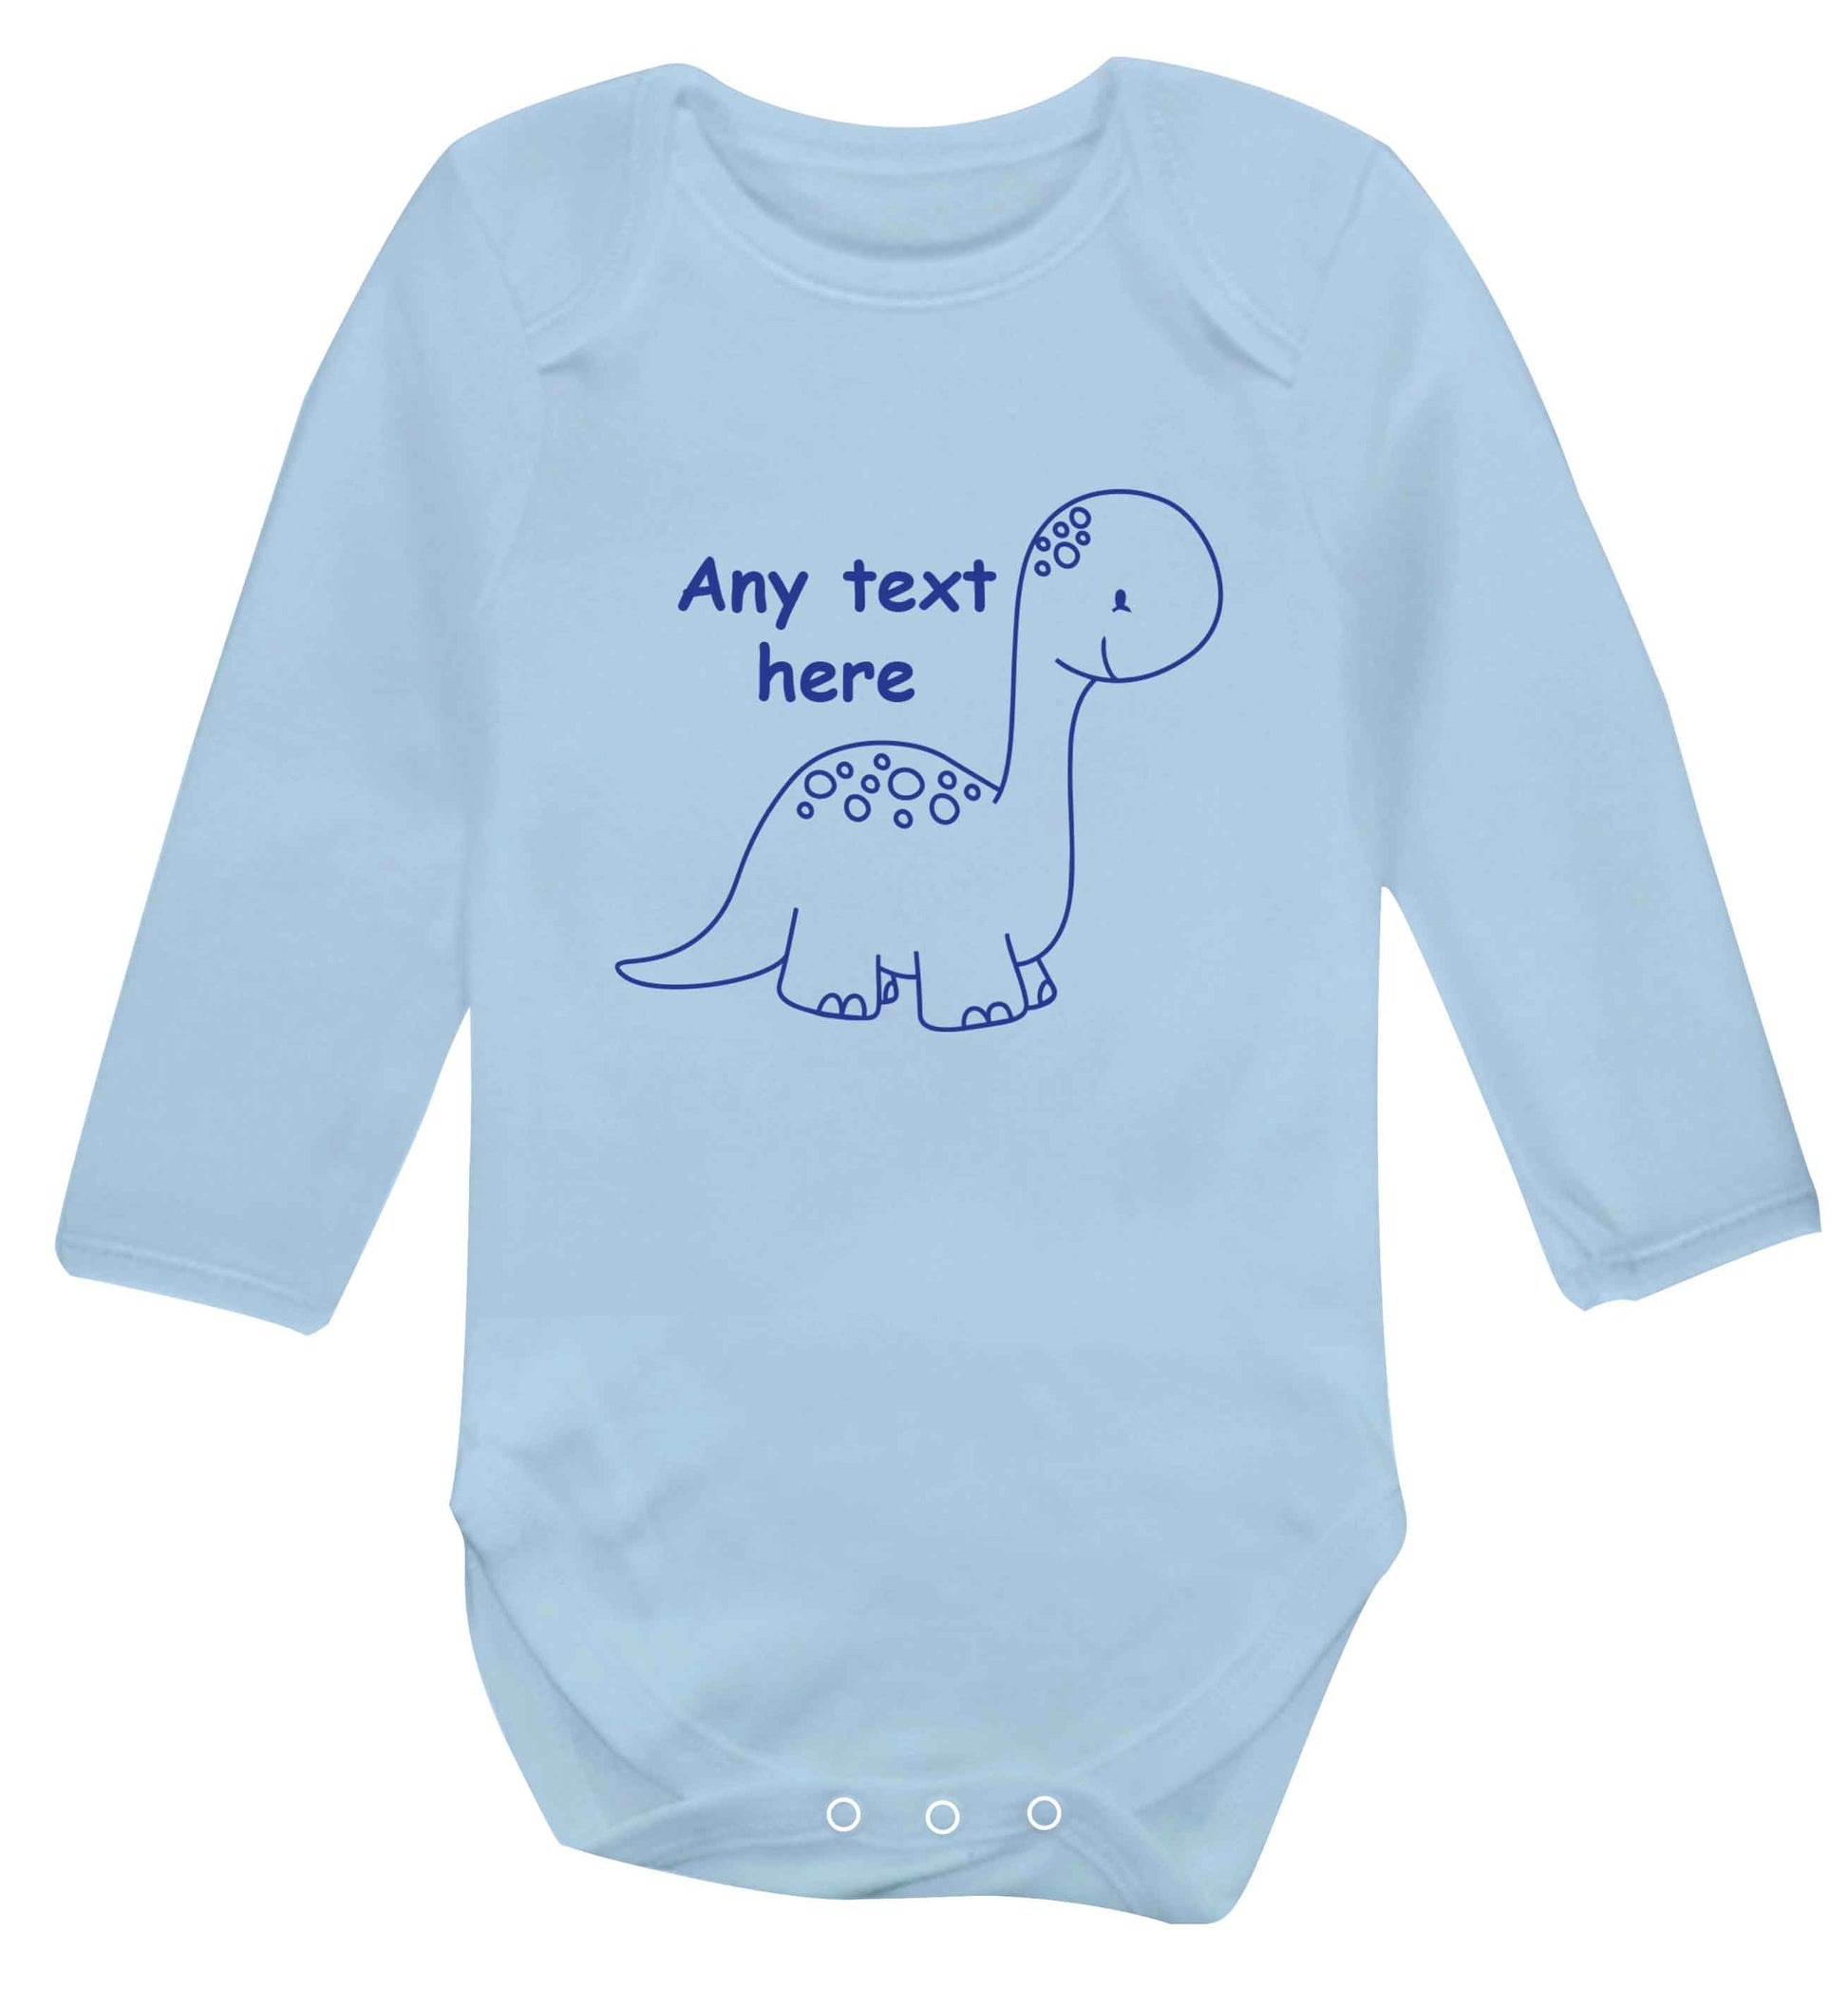 Dinosaur any text baby vest long sleeved pale blue 6-12 months